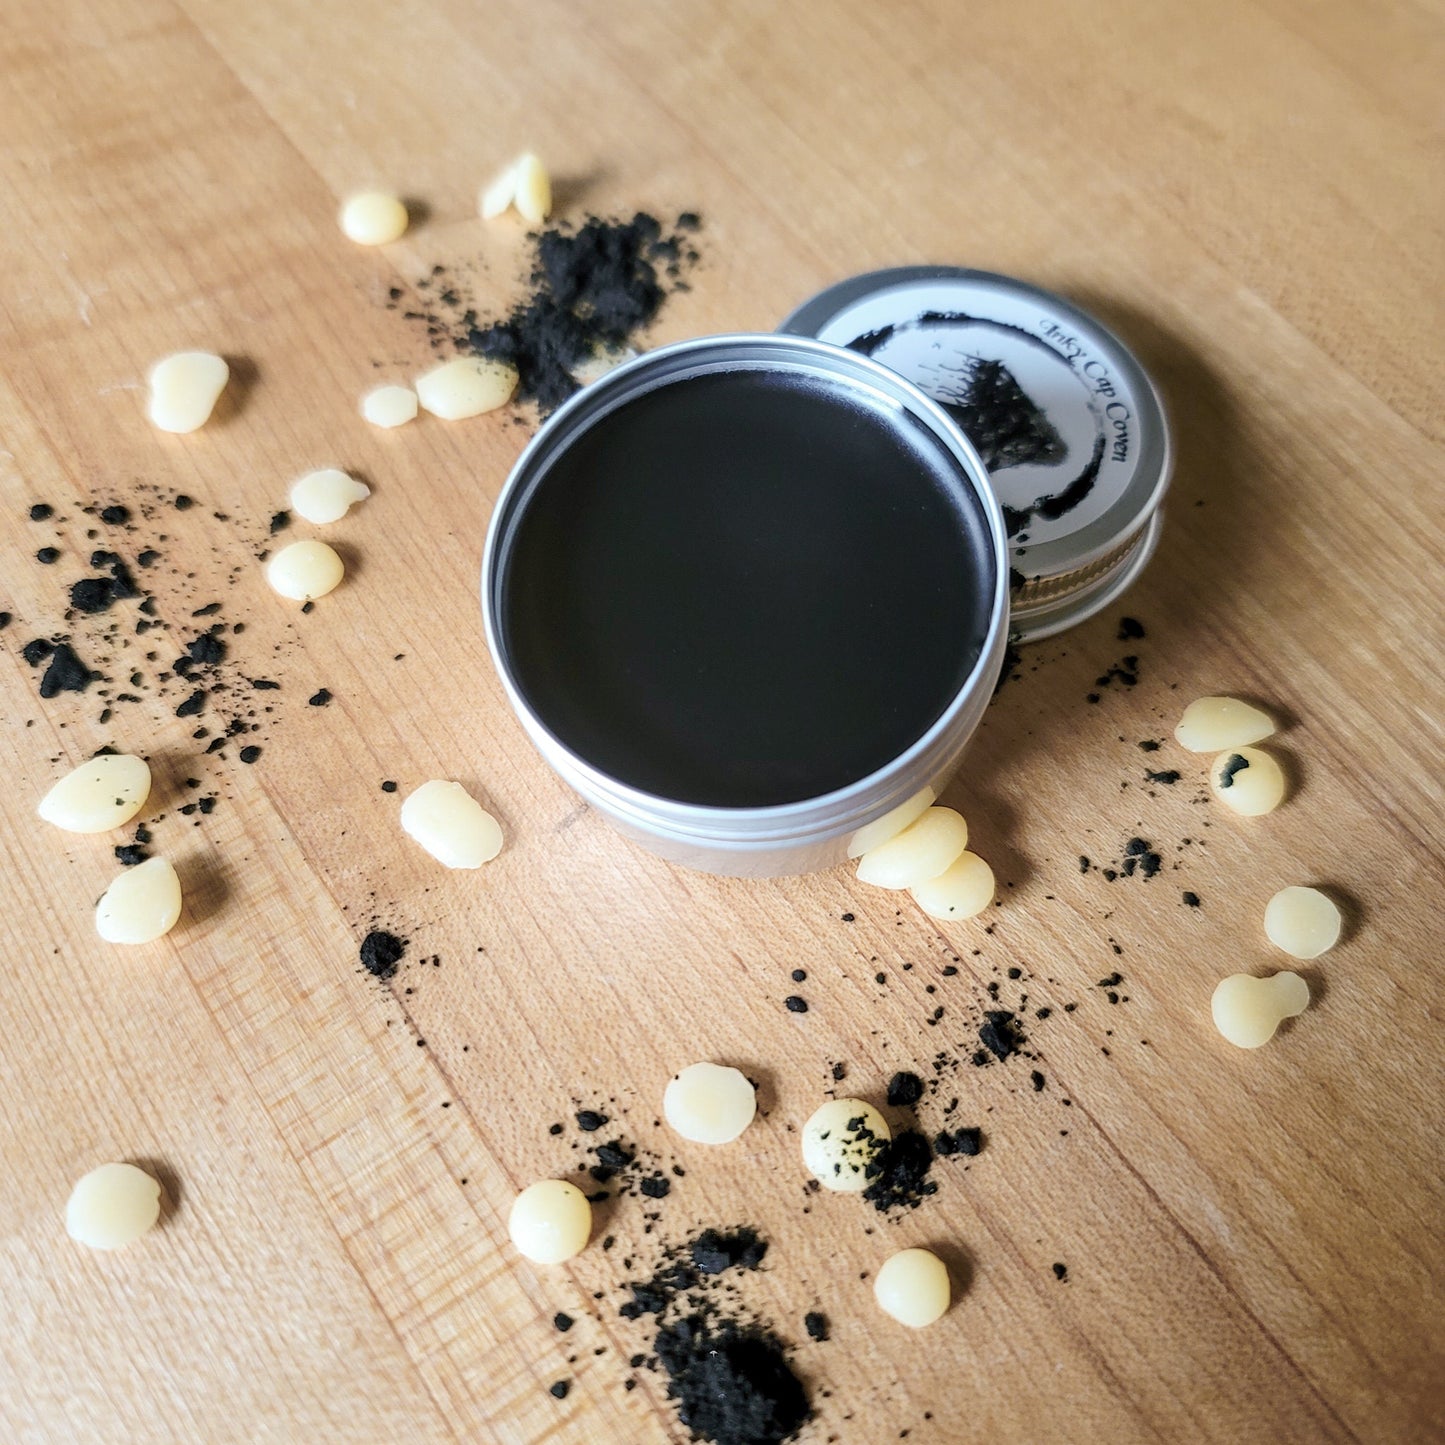 Charcoal Draw - Organic Activated Charcoal and Bentonite Clay Salve